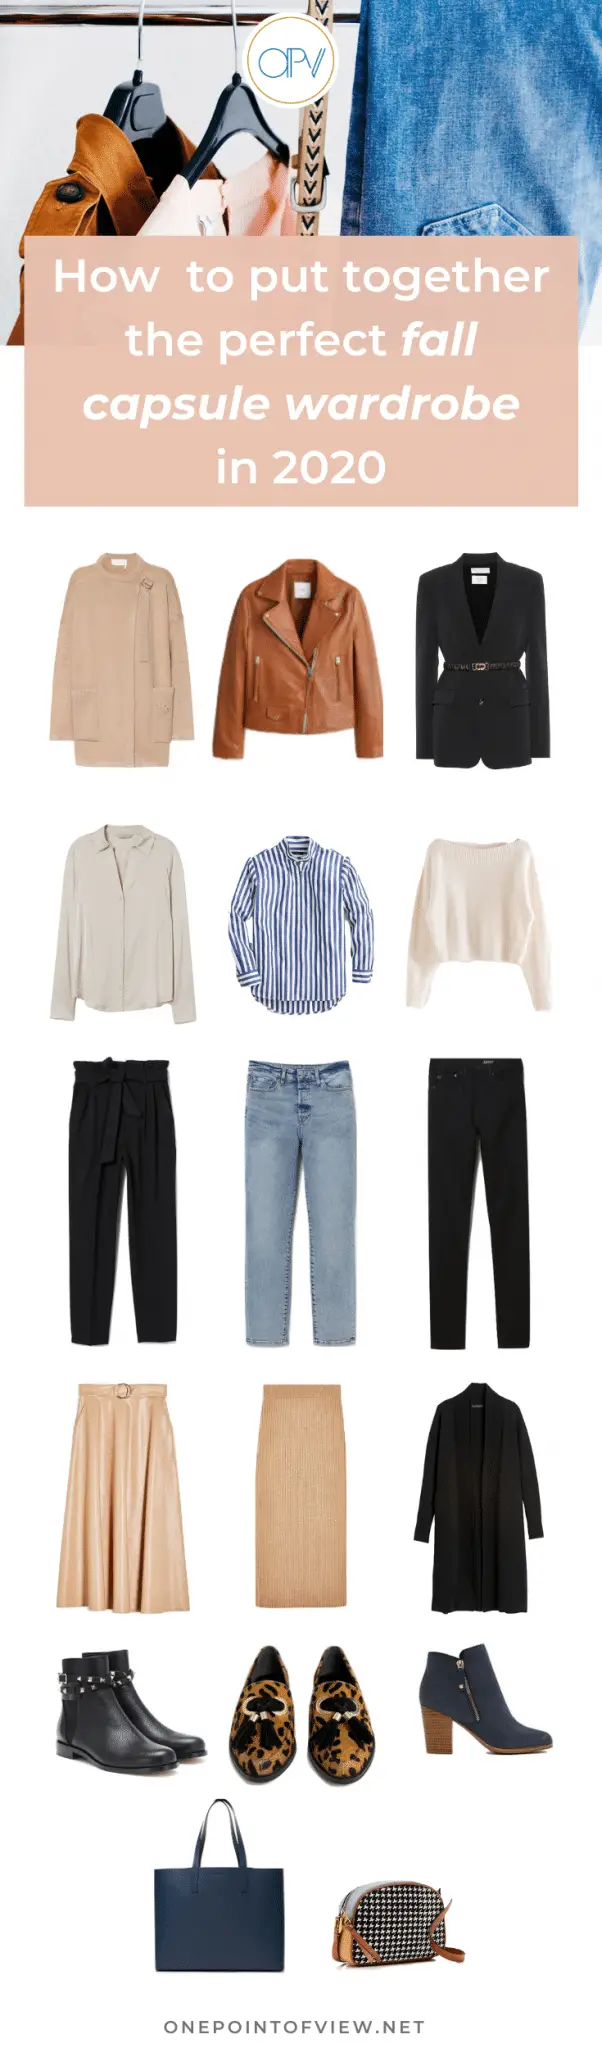 How to Put Together the Perfect Fall Capsule Wardrobe